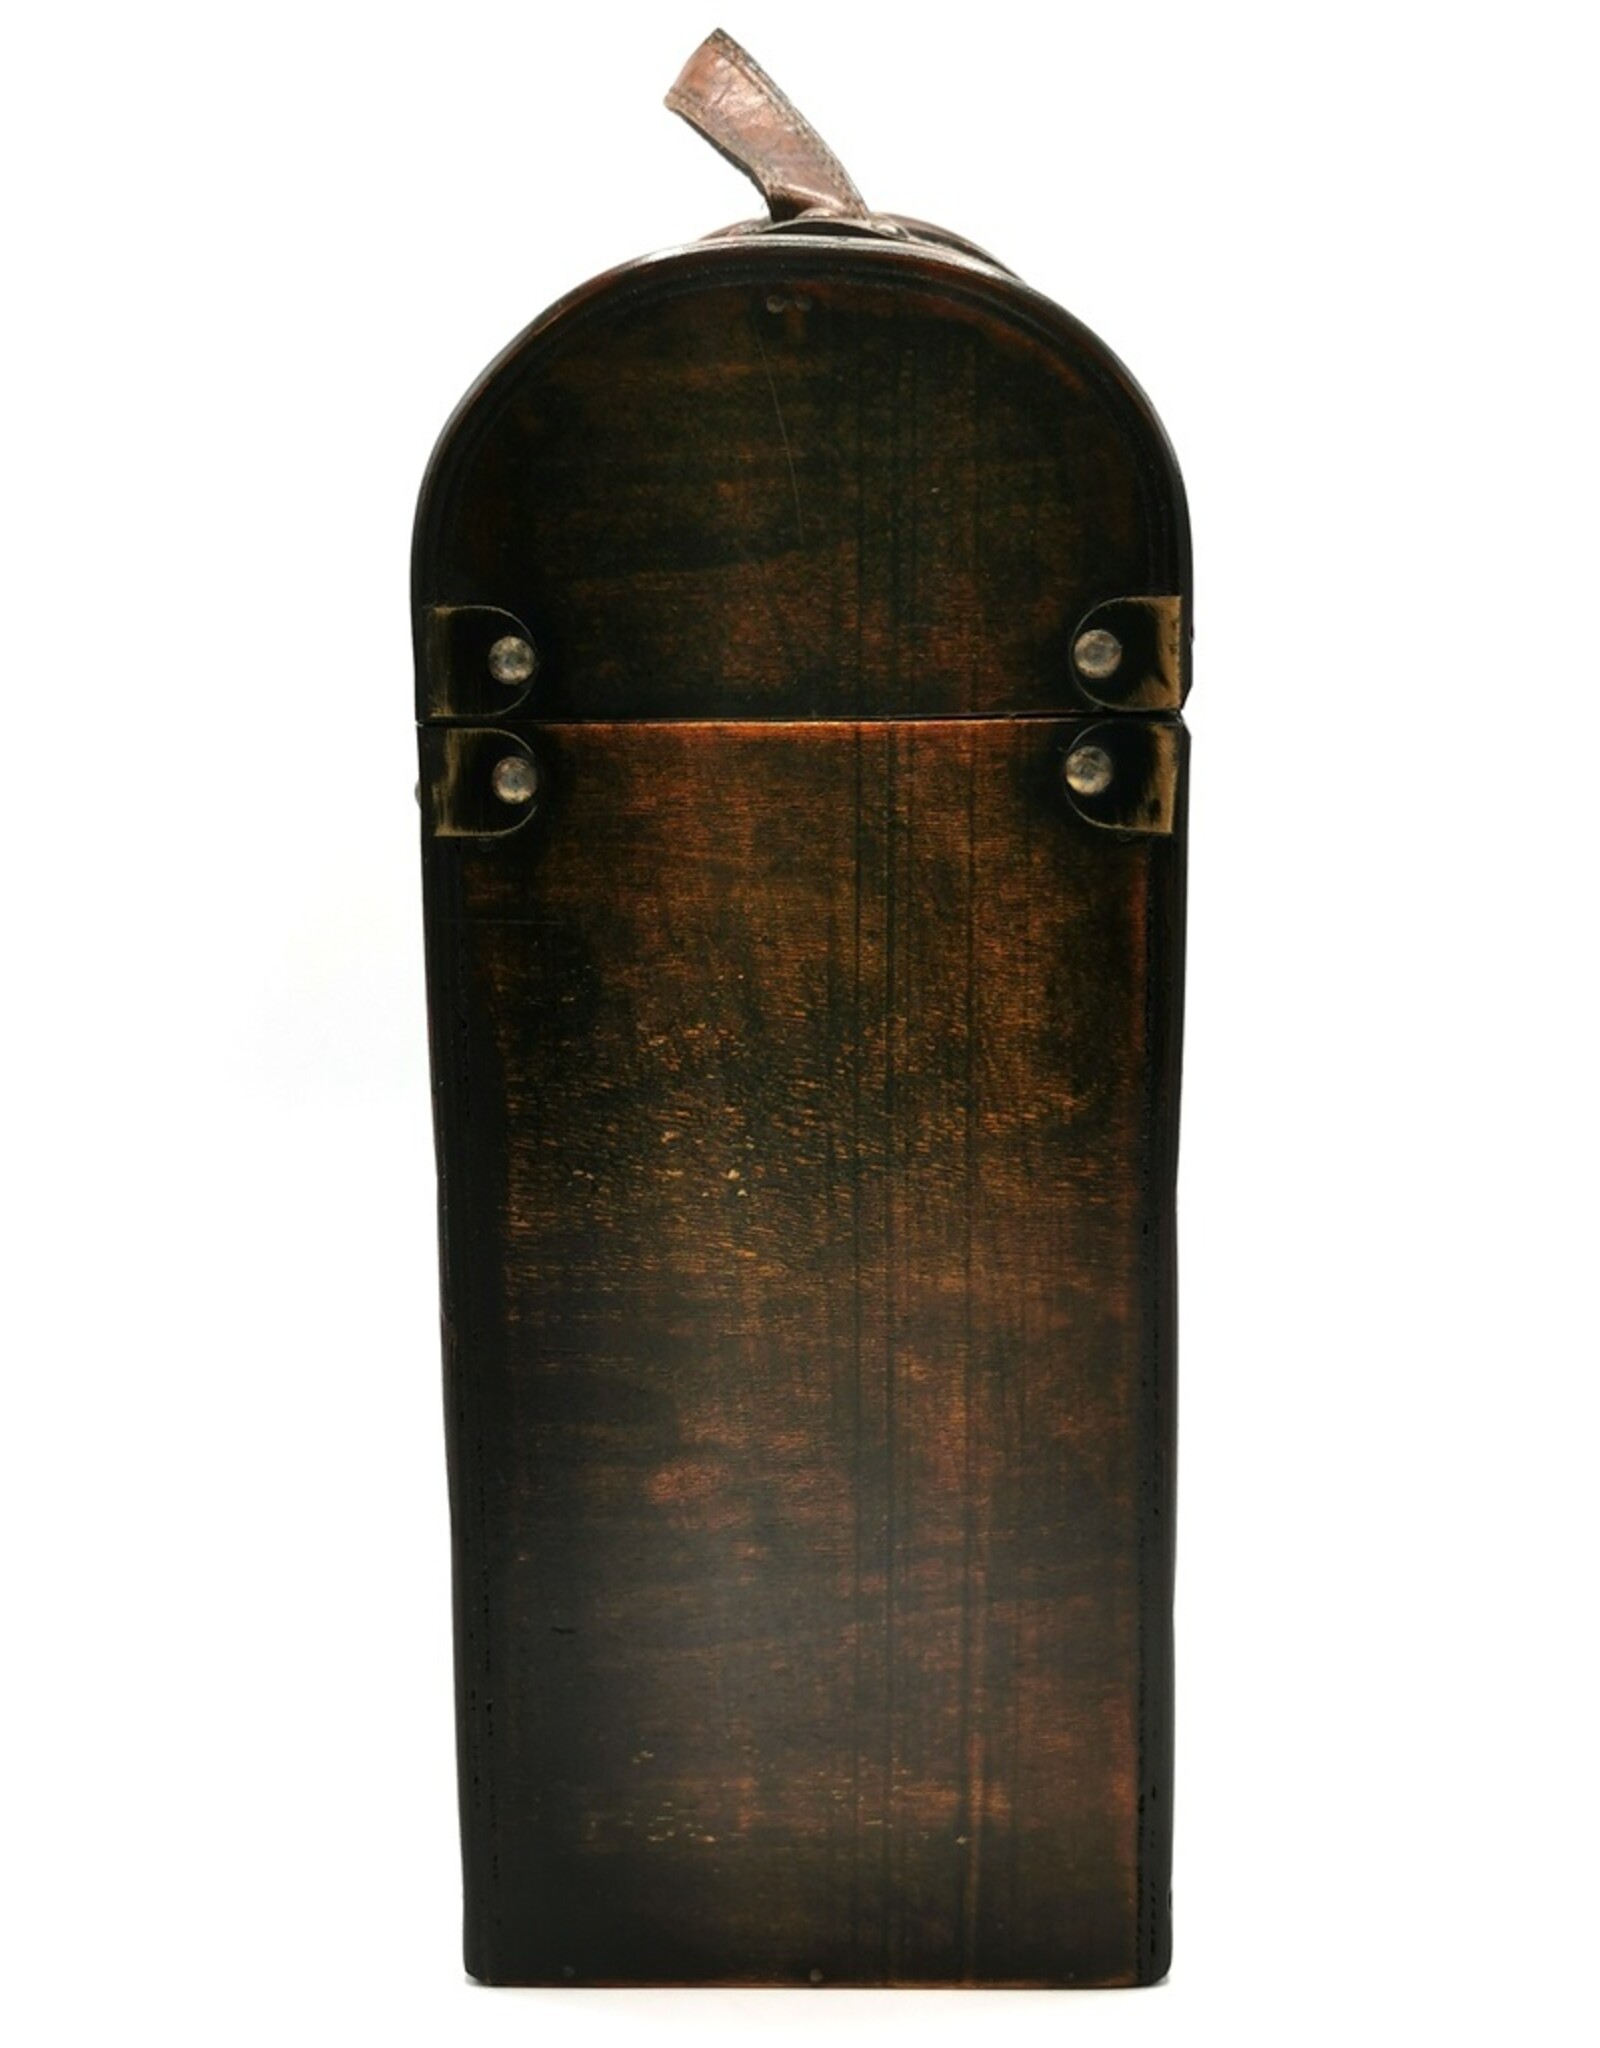 Stip Miscellaneous - Wooden Vintage Suitcase finished with Eco-Leather